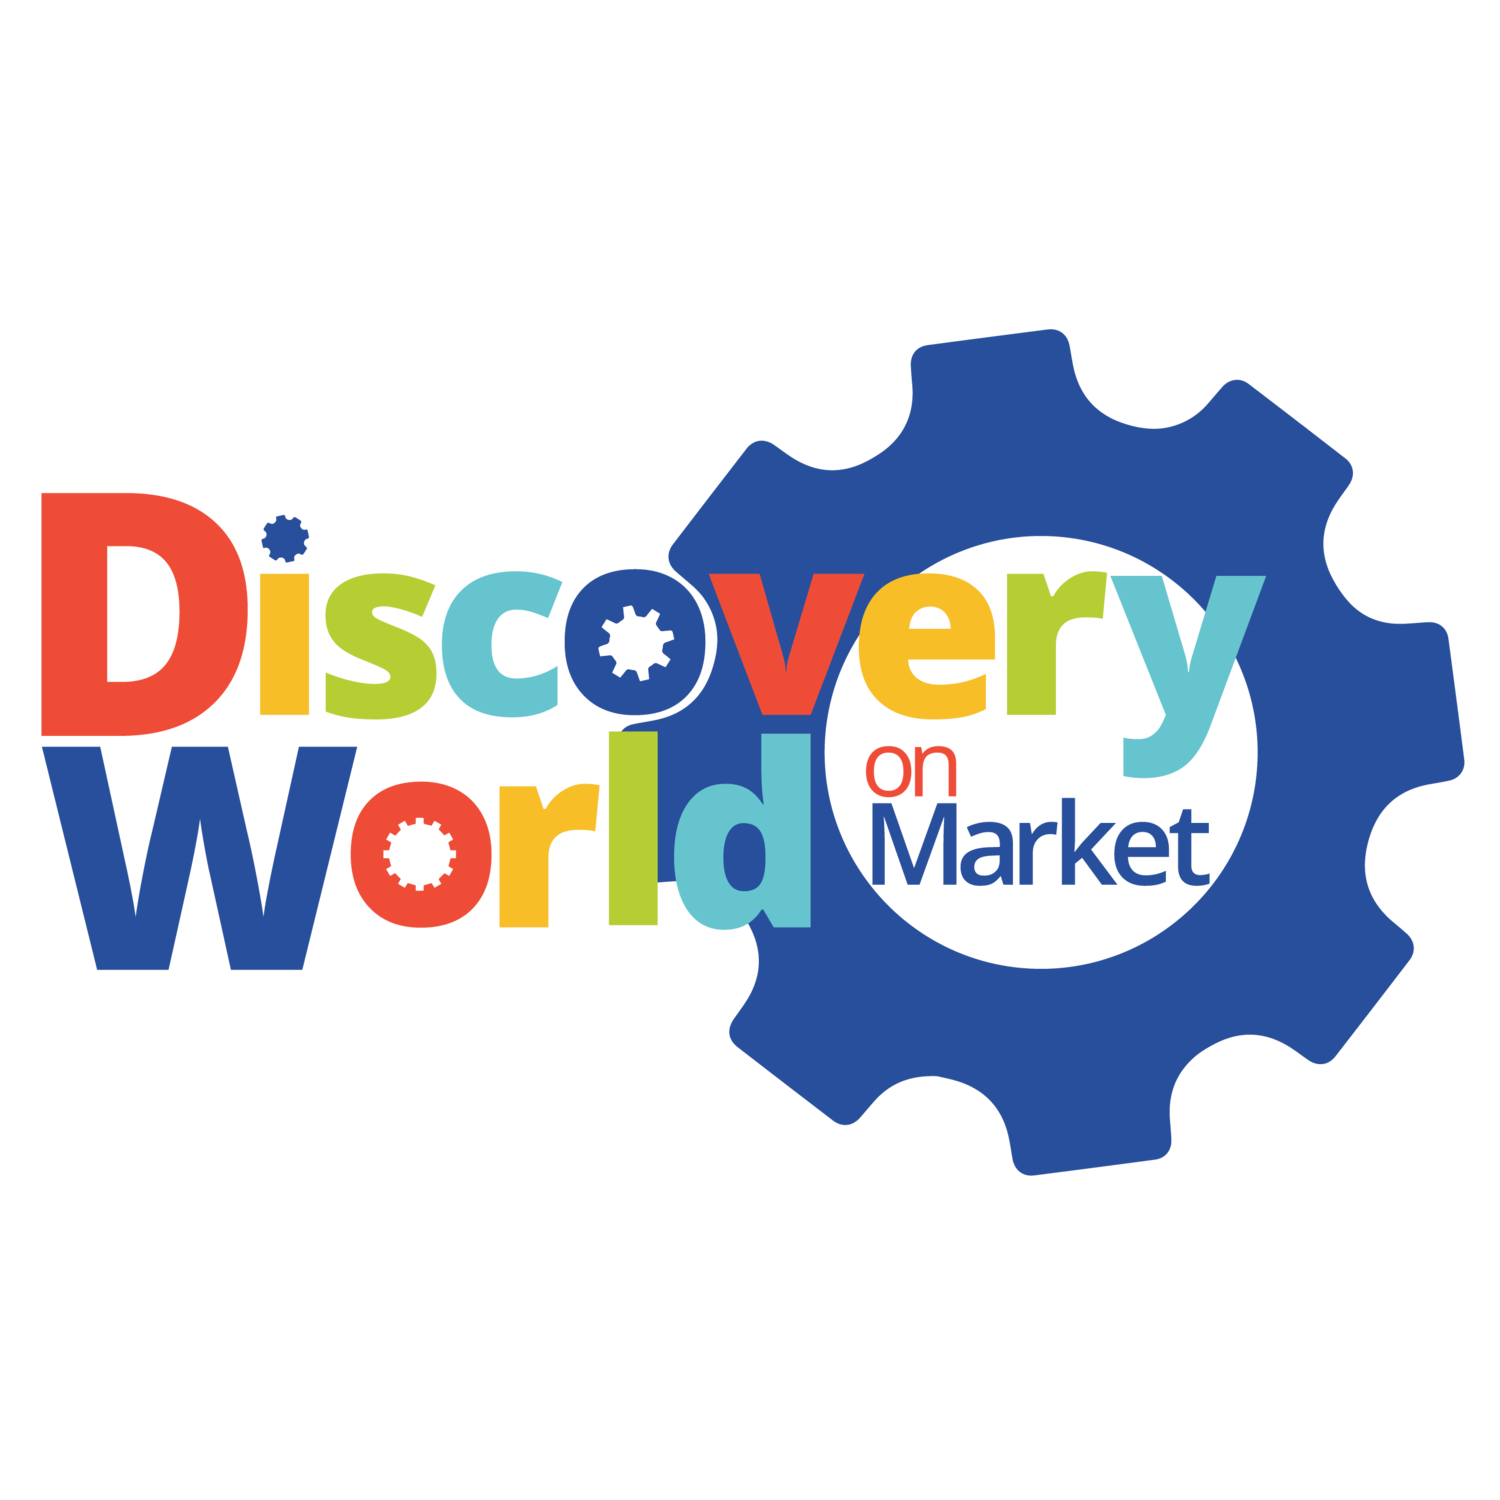 Discovery World on Market